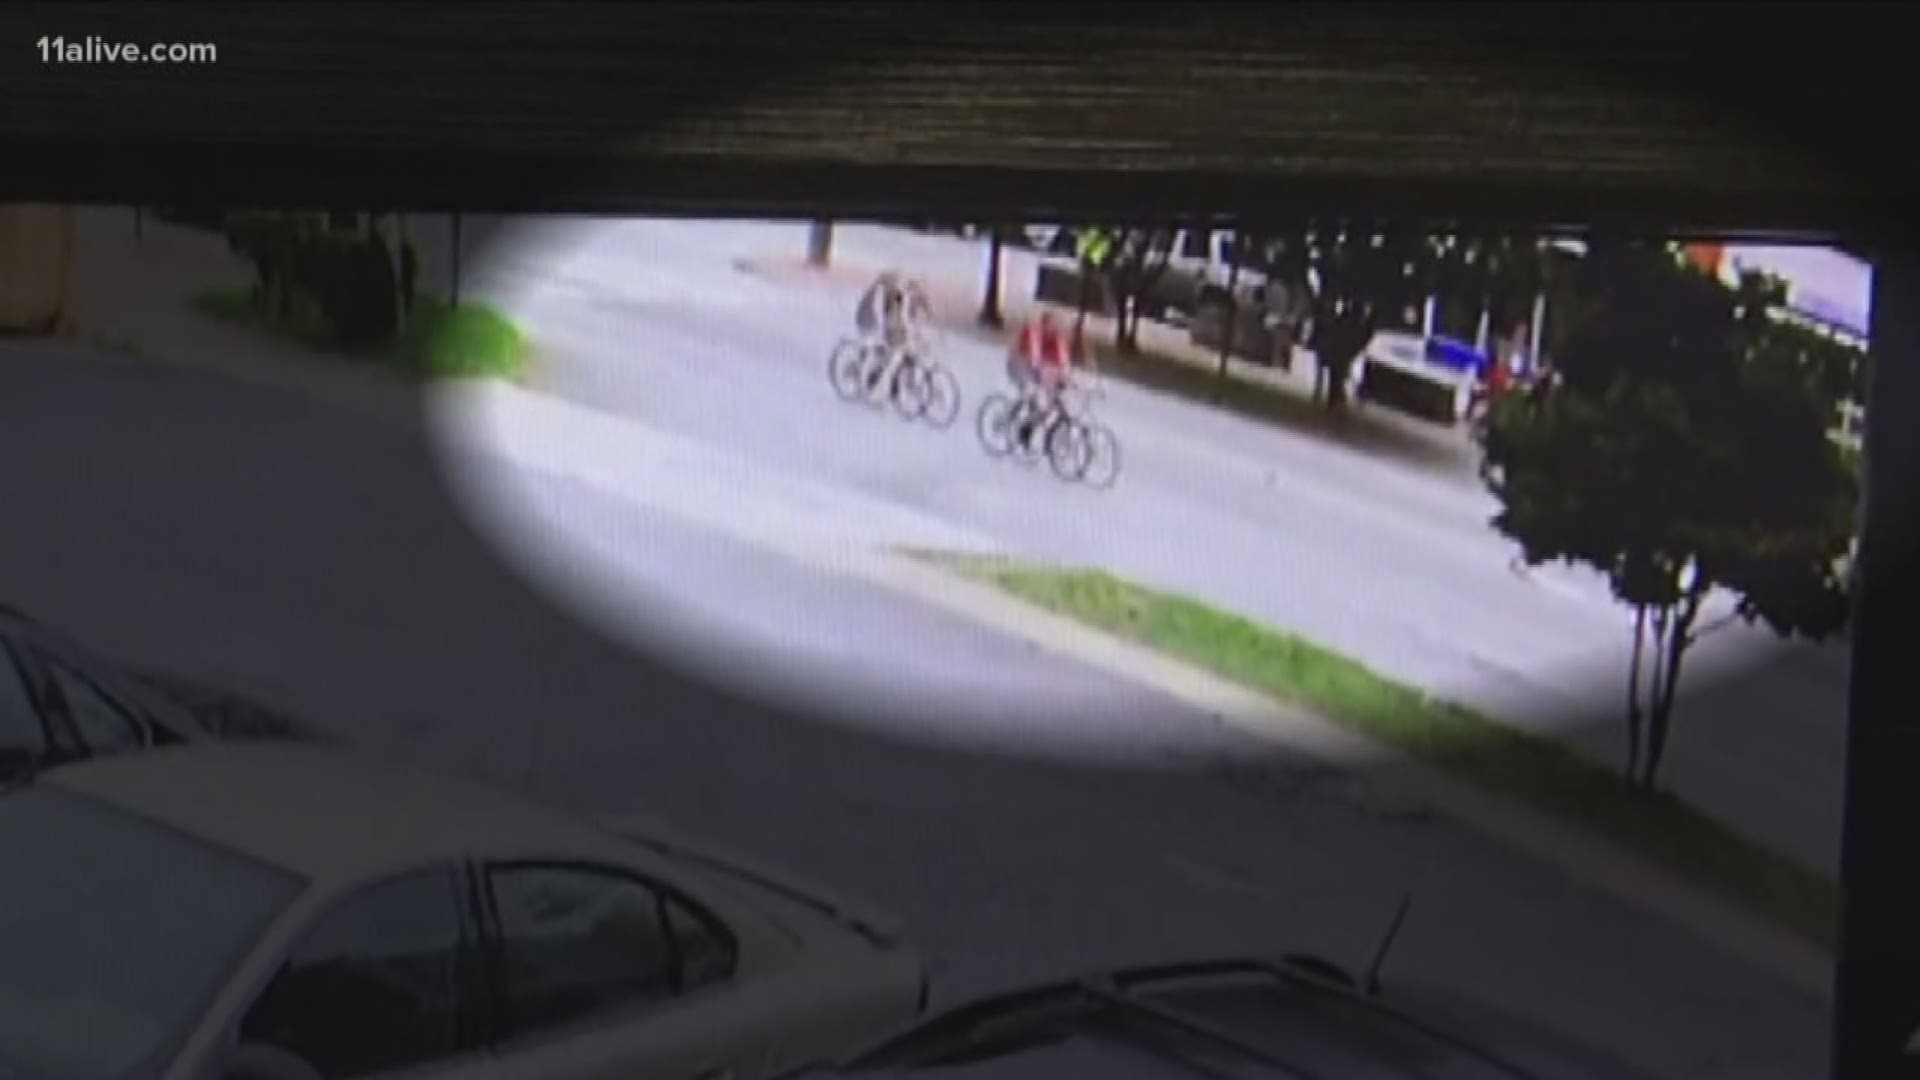 Surveillance video slows the black car following behind them, then suddenly swerving into their lane, hitting the woman and tossing her from her bike.